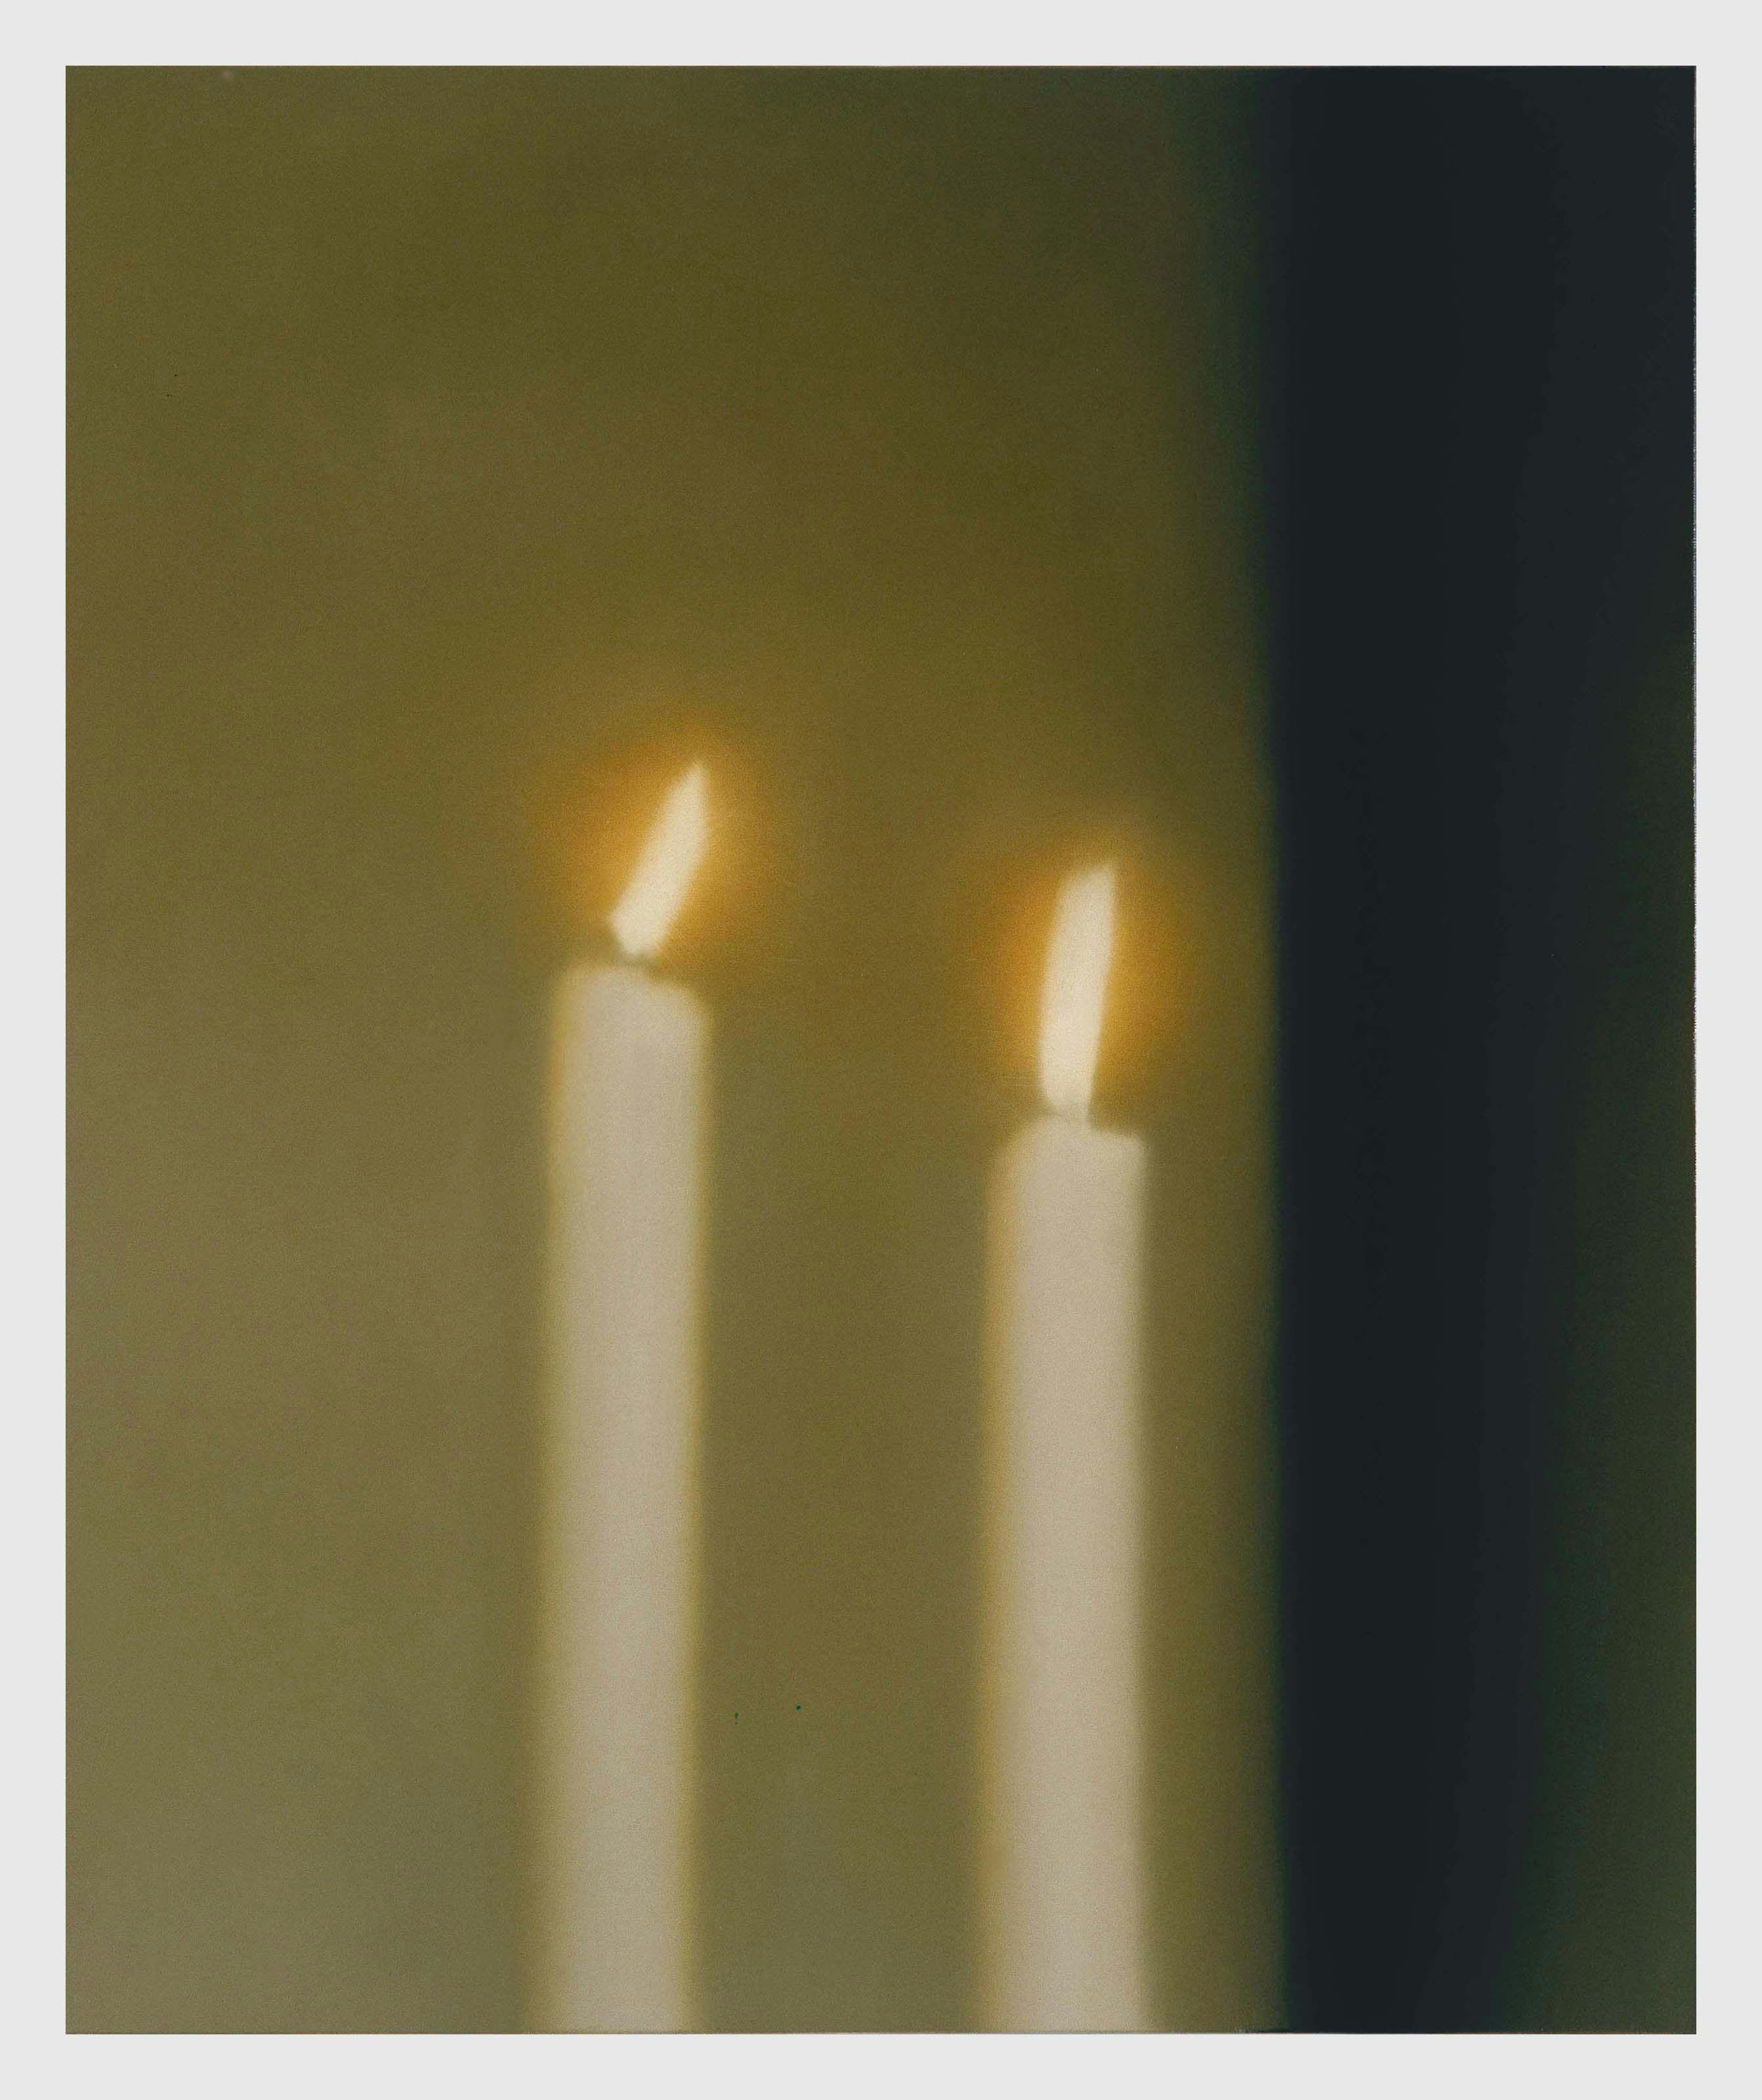 A painting by Gerhard Richter, titled ﻿Zwei Kerzen (Two Candles), dated 1982.